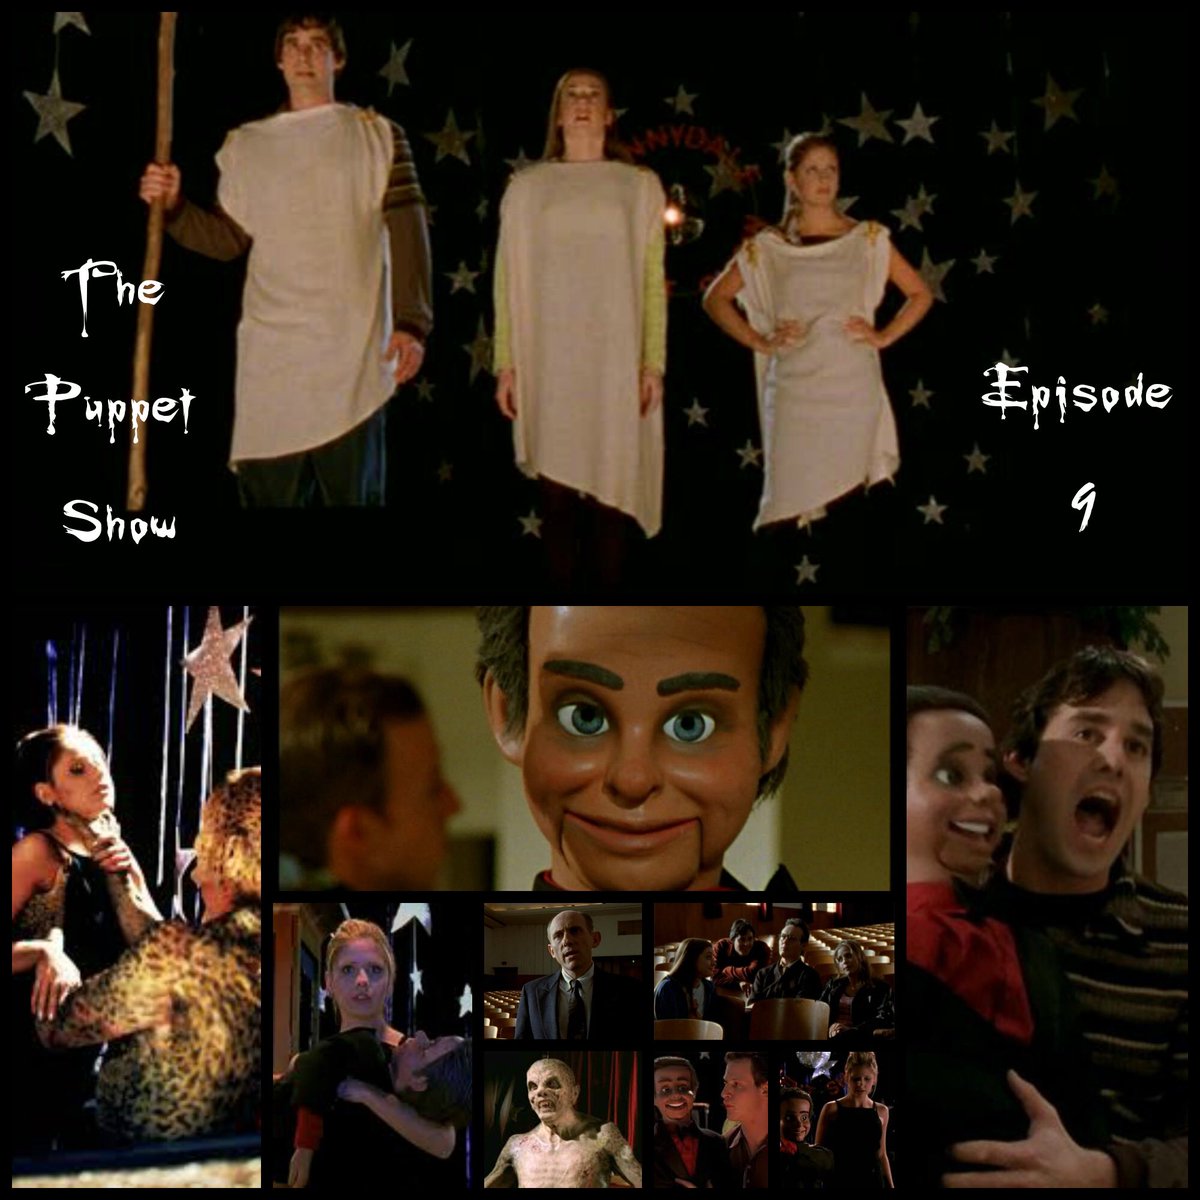 On this day in 1997, this #Buffy episode was released! ☺️❤️ #ThePuppetShow